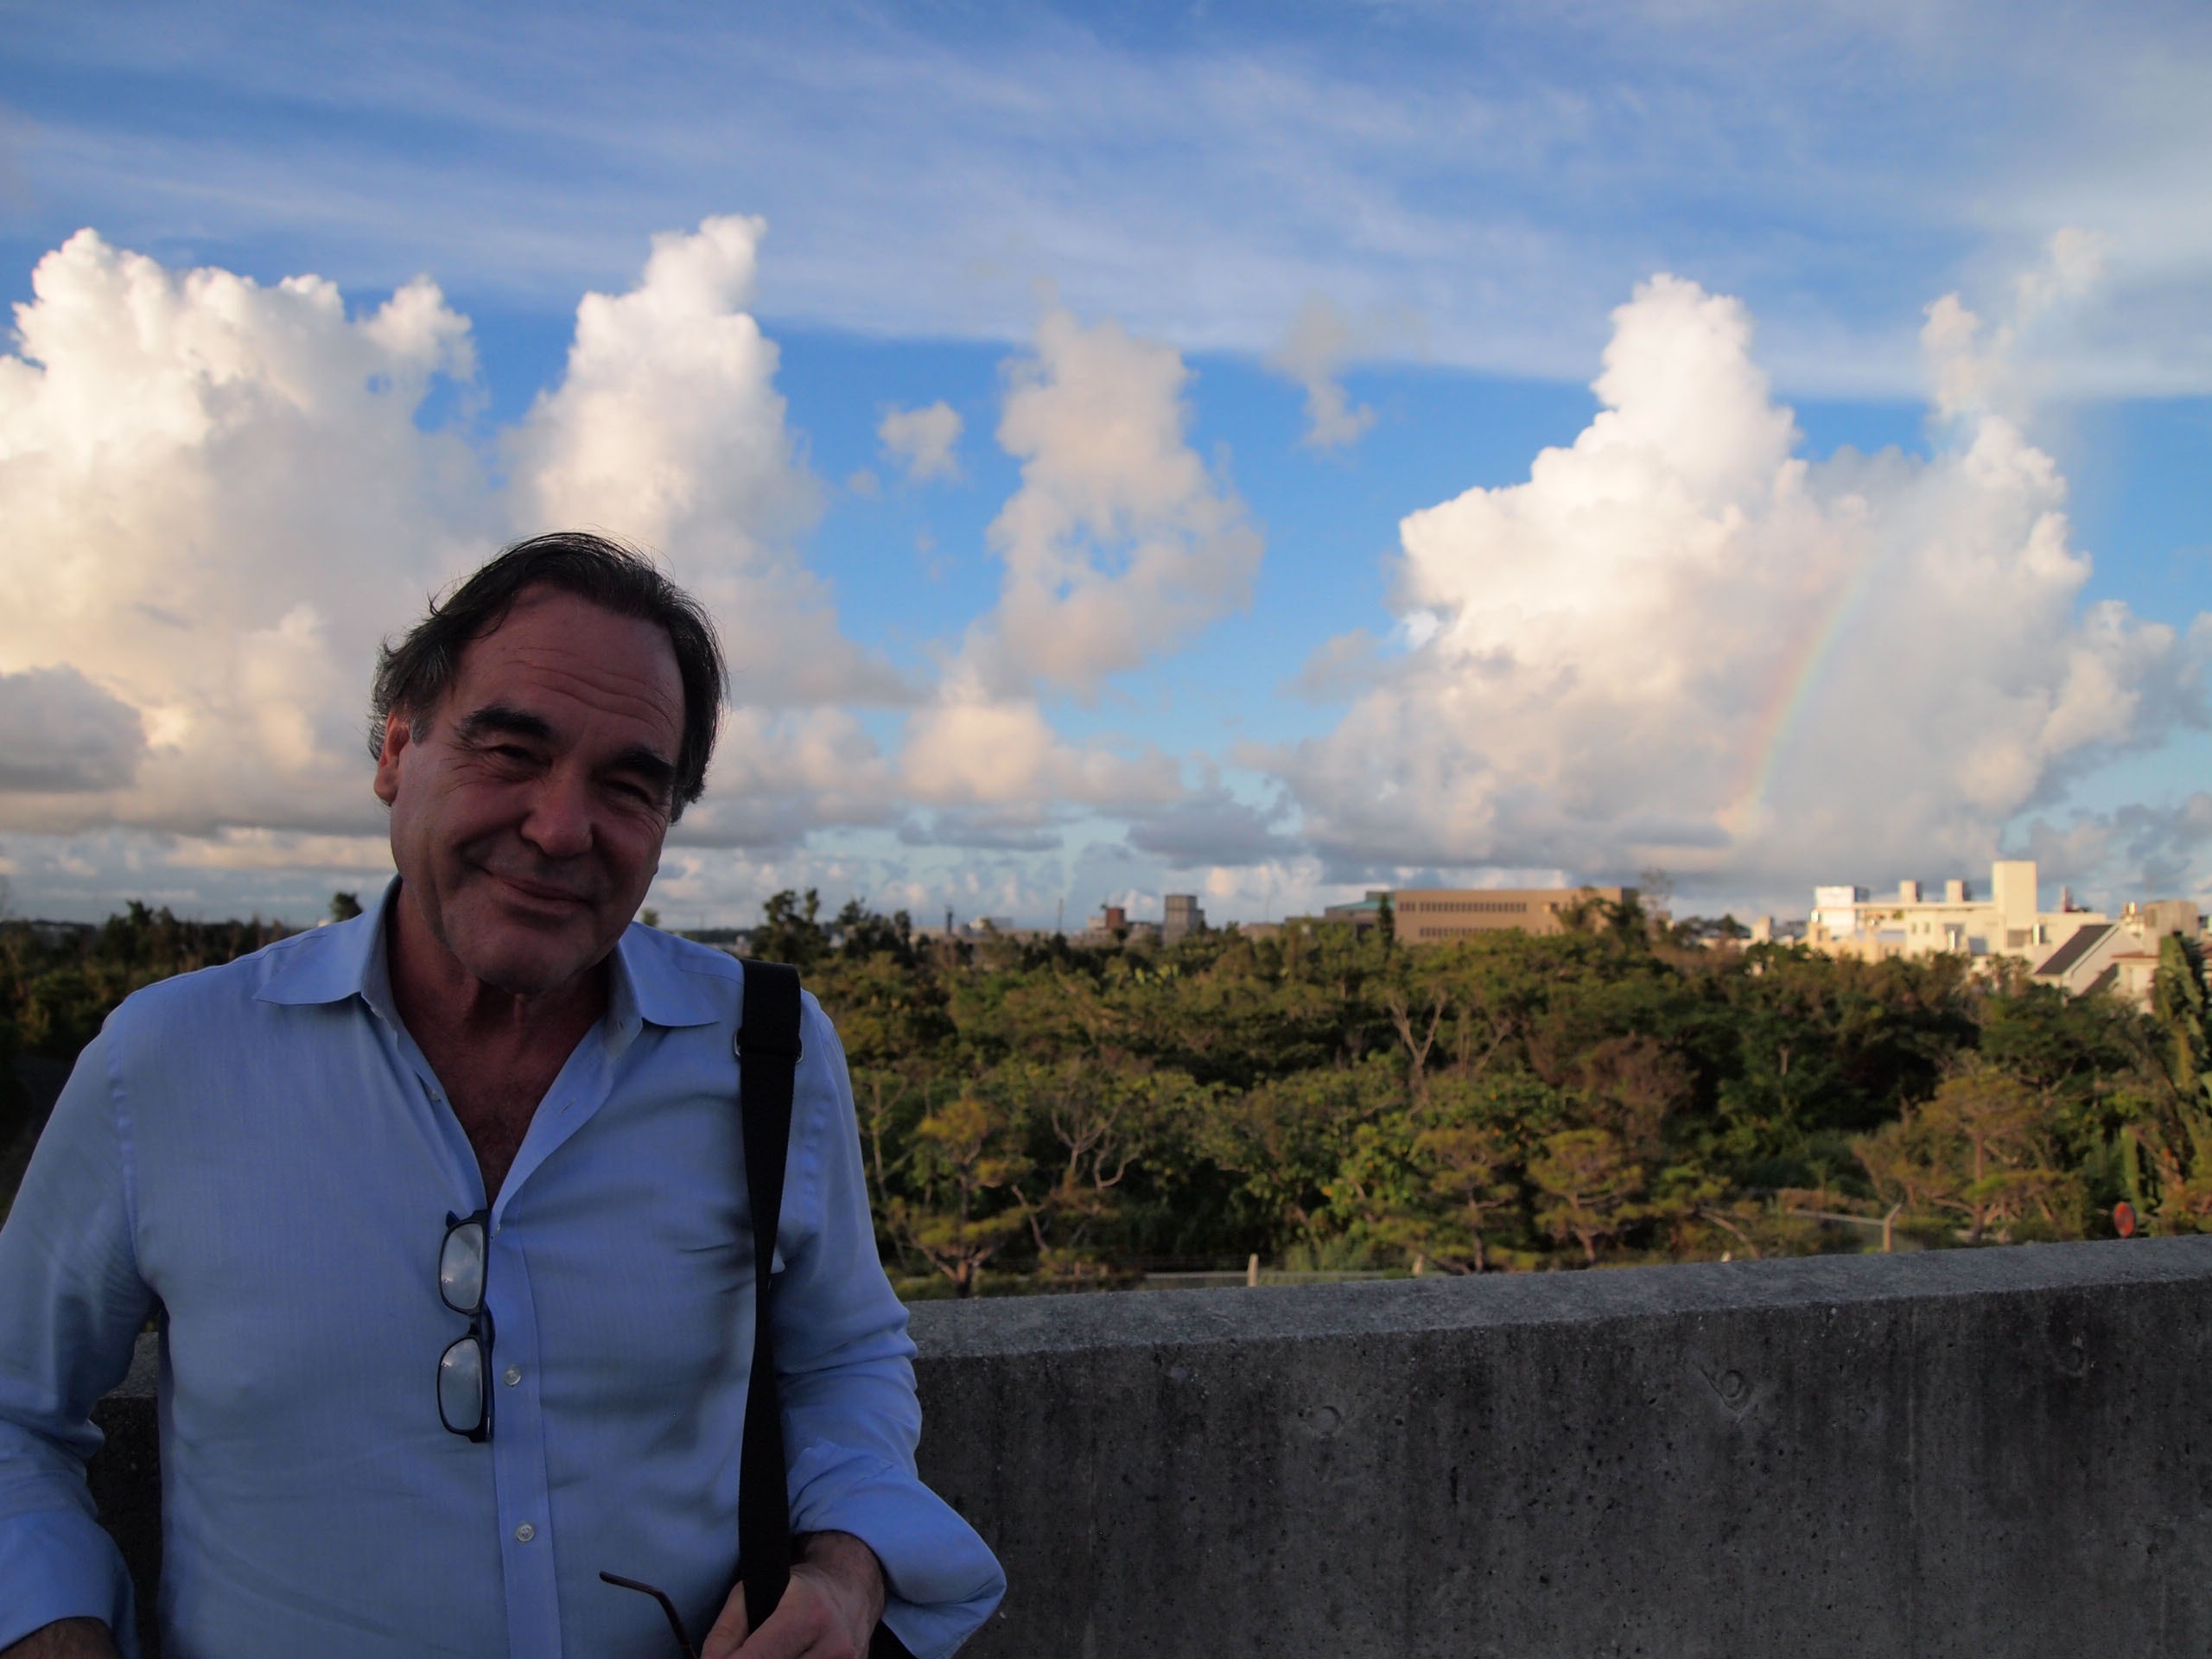 Tour of duty: A rainbow breaks through the clouds as American film director Oliver Stone stands on the rooftop of Sakima Art Museum in Ginowan, Okinawa, on Aug. 13. | JON MITCHELL